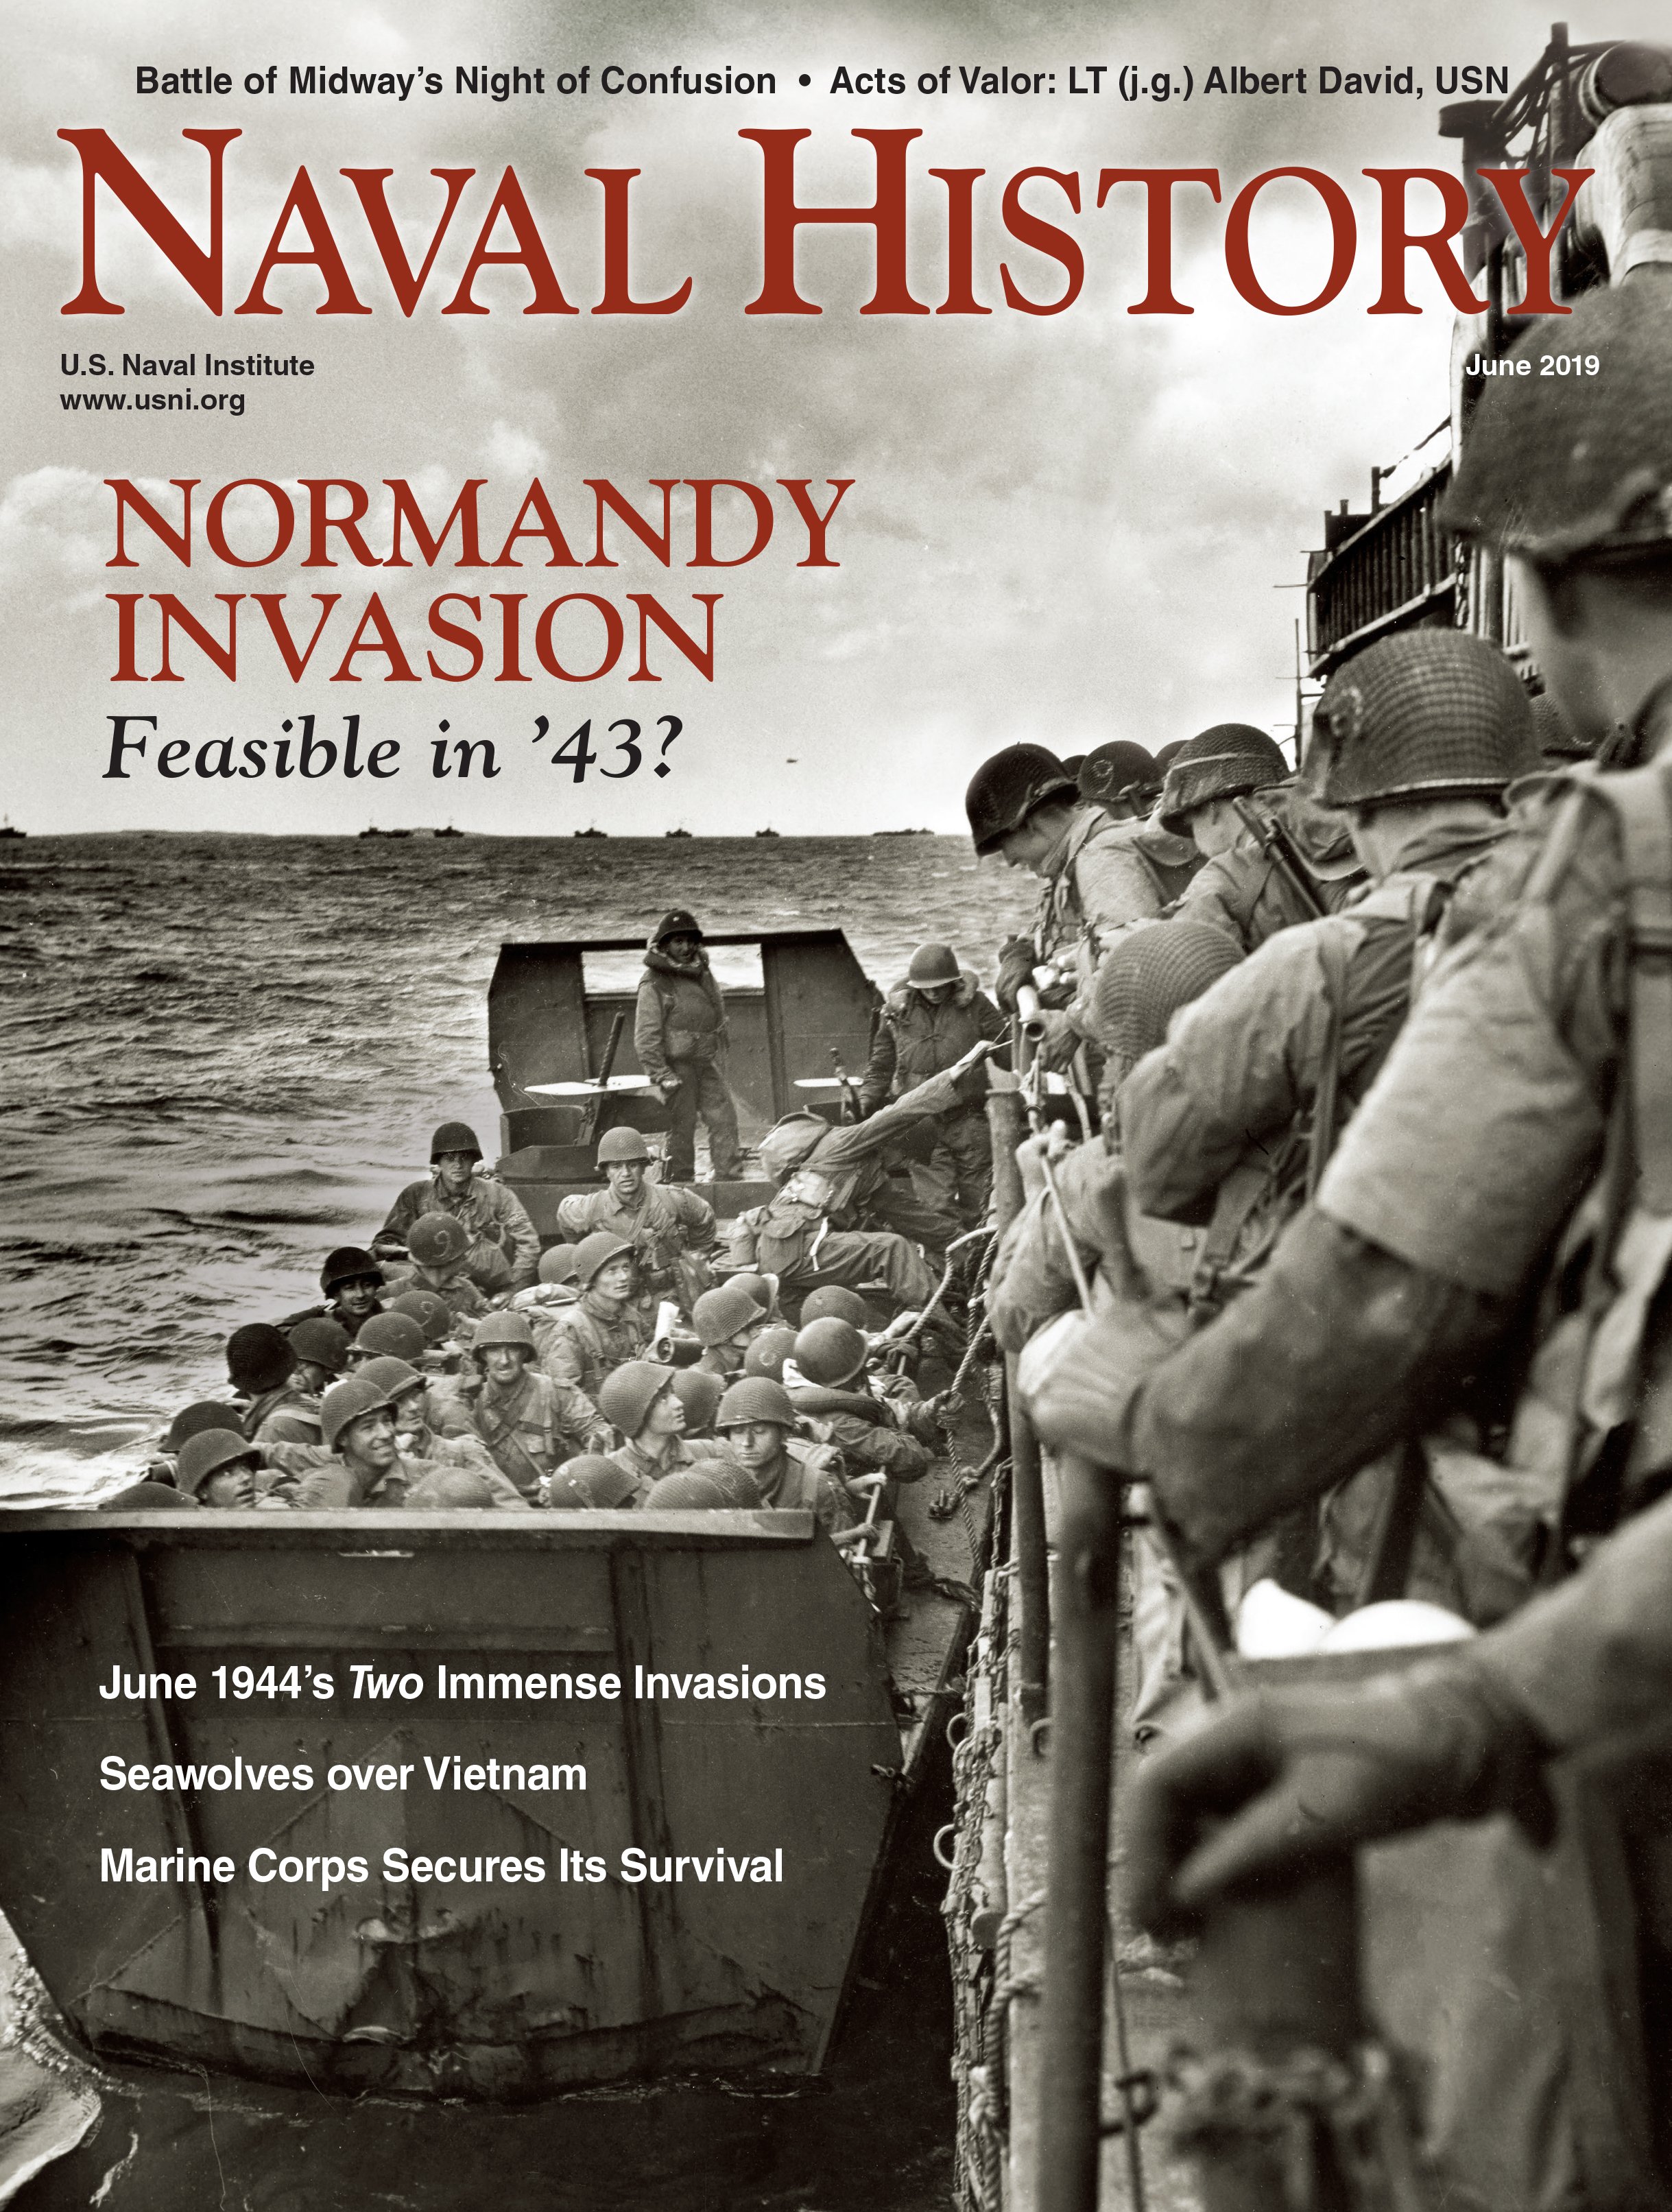 Naval History Magazine - June 2019 Volume 33, Number 3 Cover